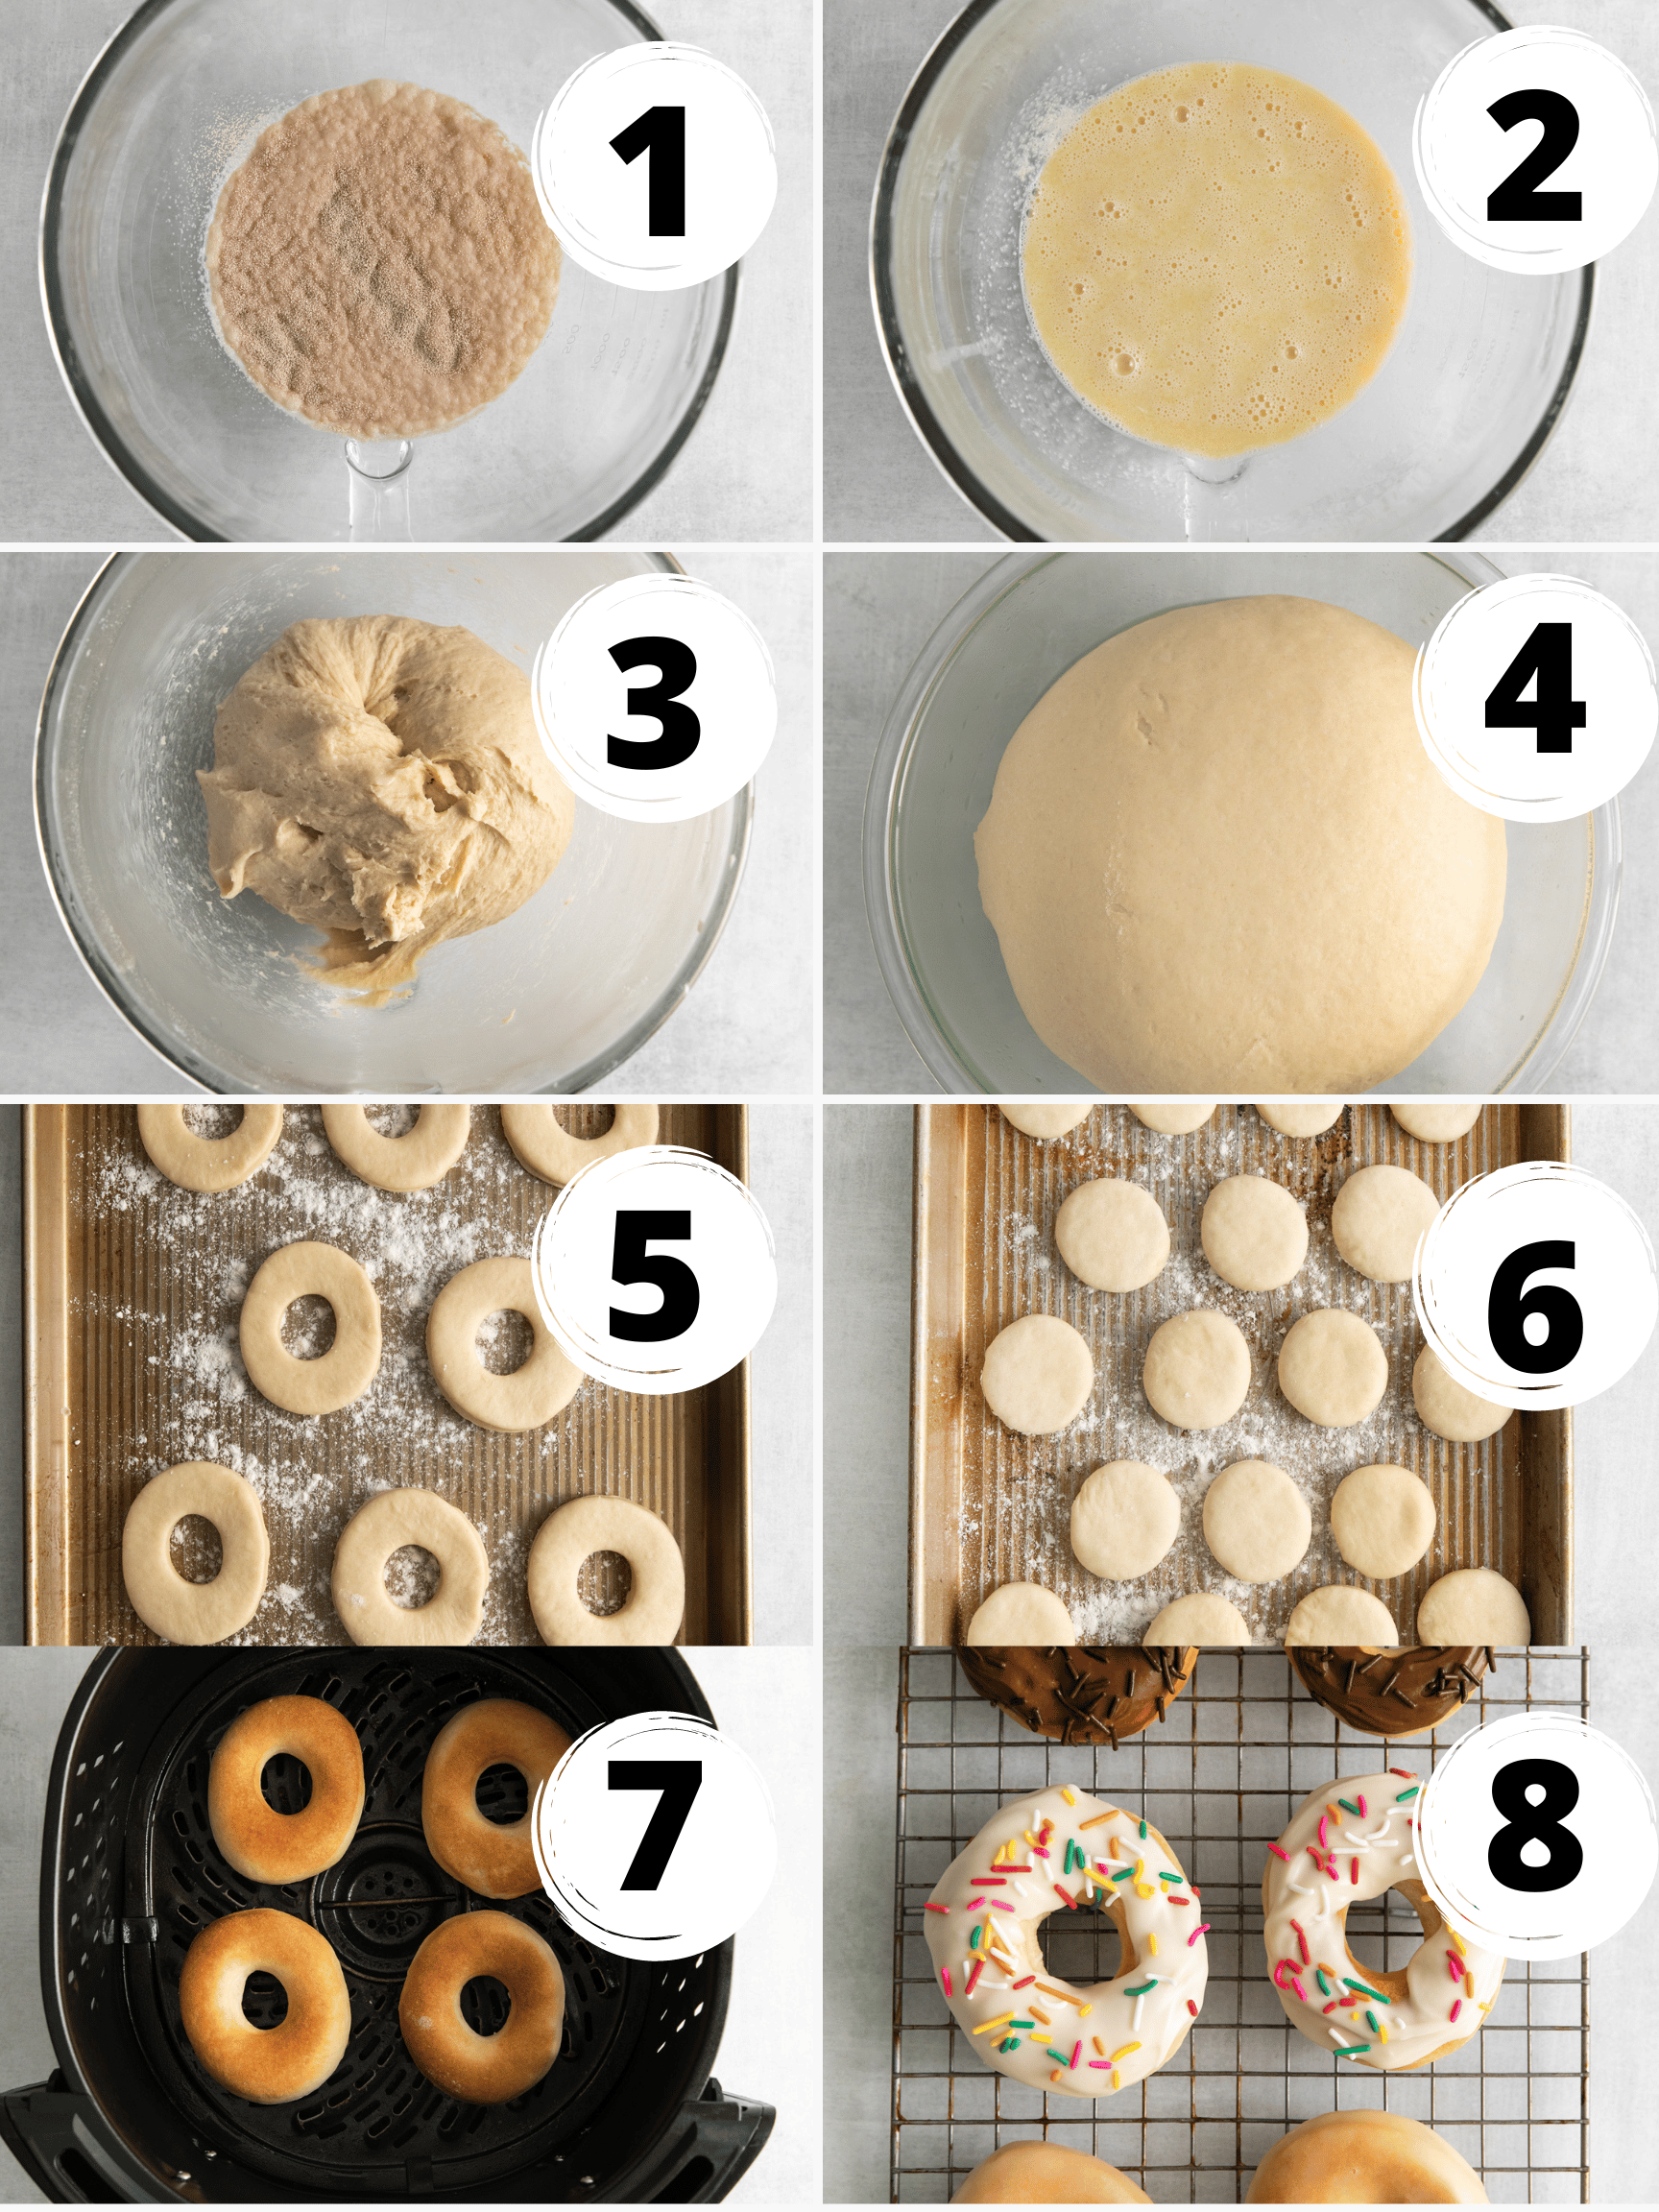 Collage of photos showing the steps to make Air Fryer Donuts.